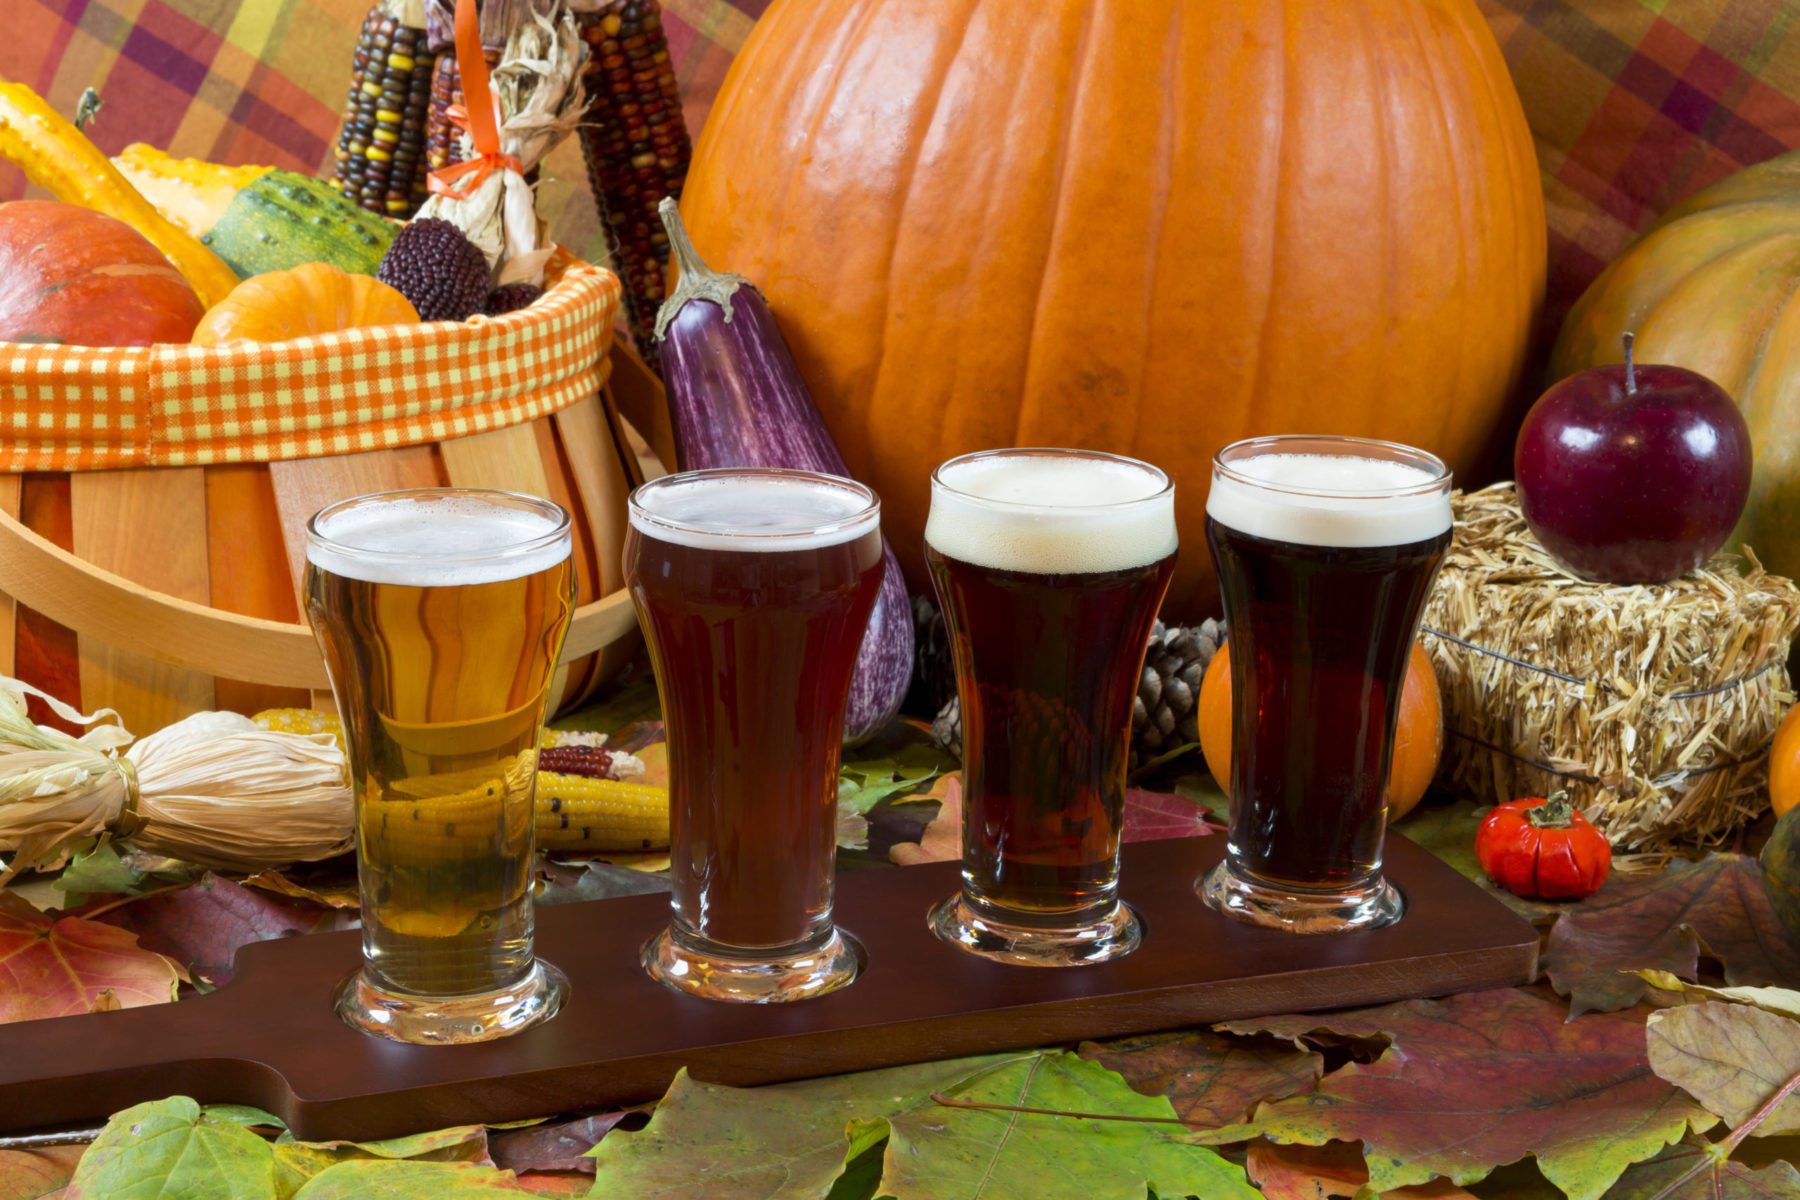 photo of a flight of seasonal fall beers in front of a display of a pumpkin and other fall decor